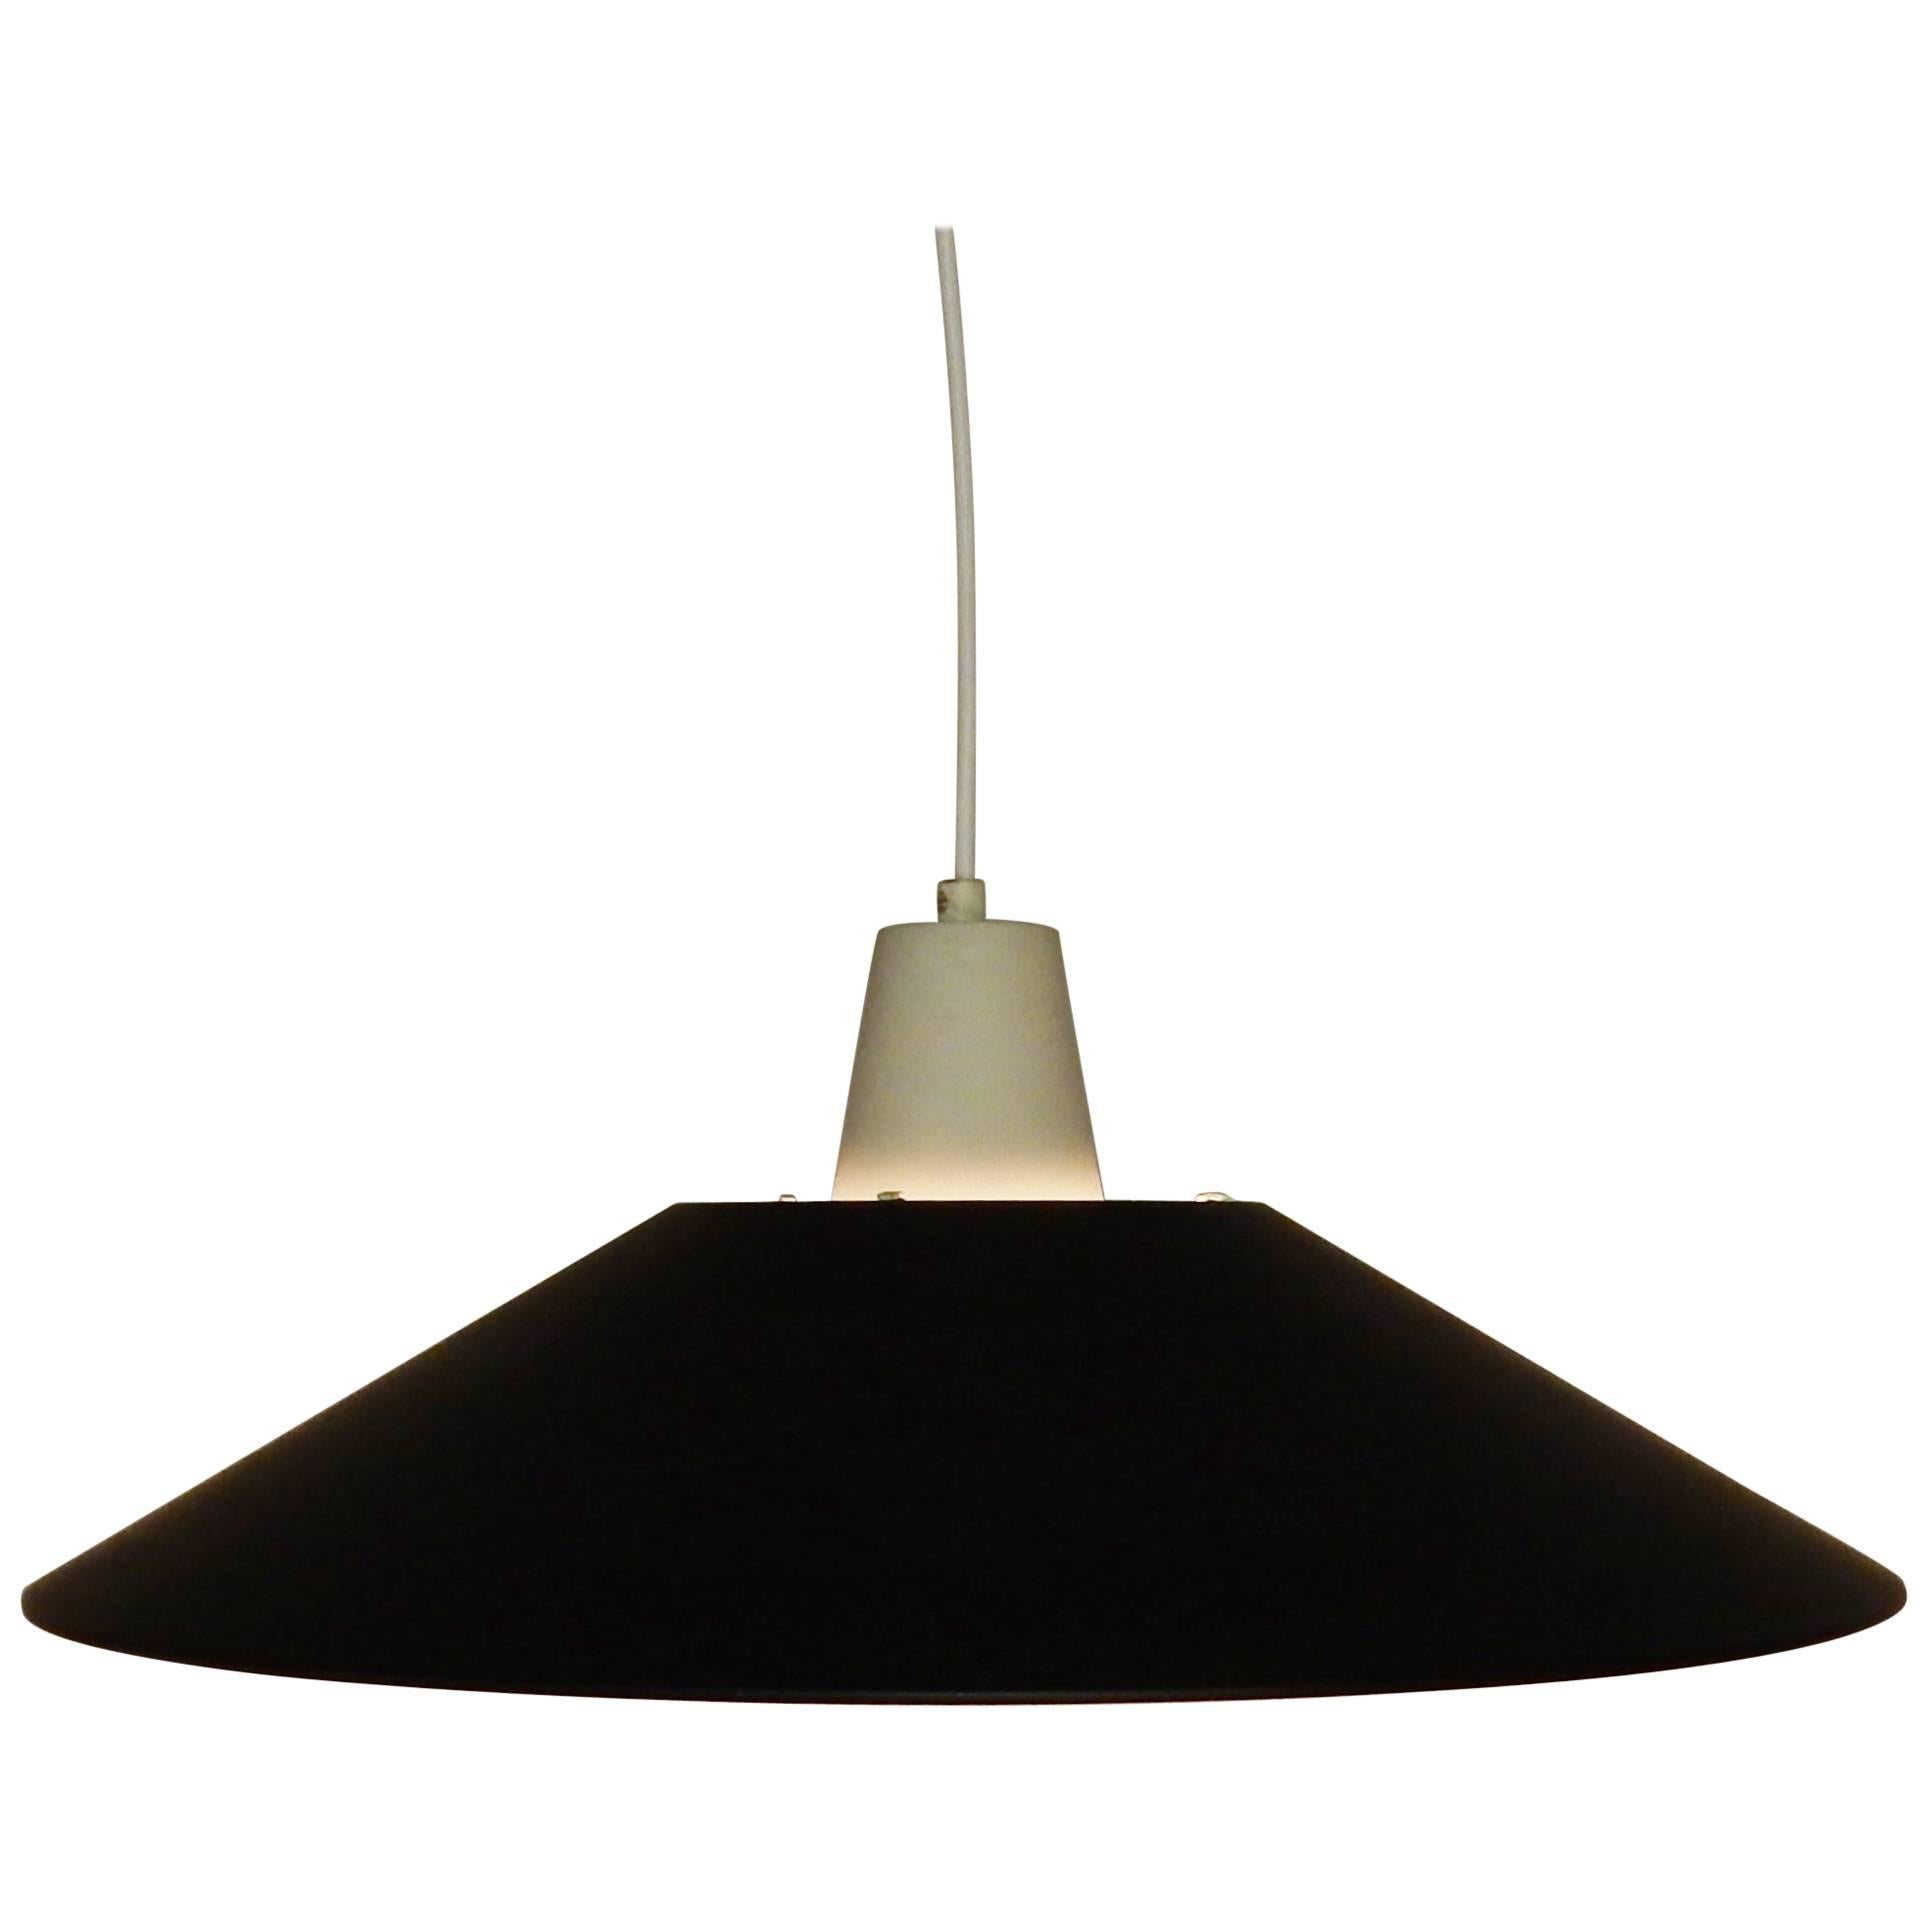 Mid-Century Pendant Light in Black and White Lacquered Metal, 1950s-1960s